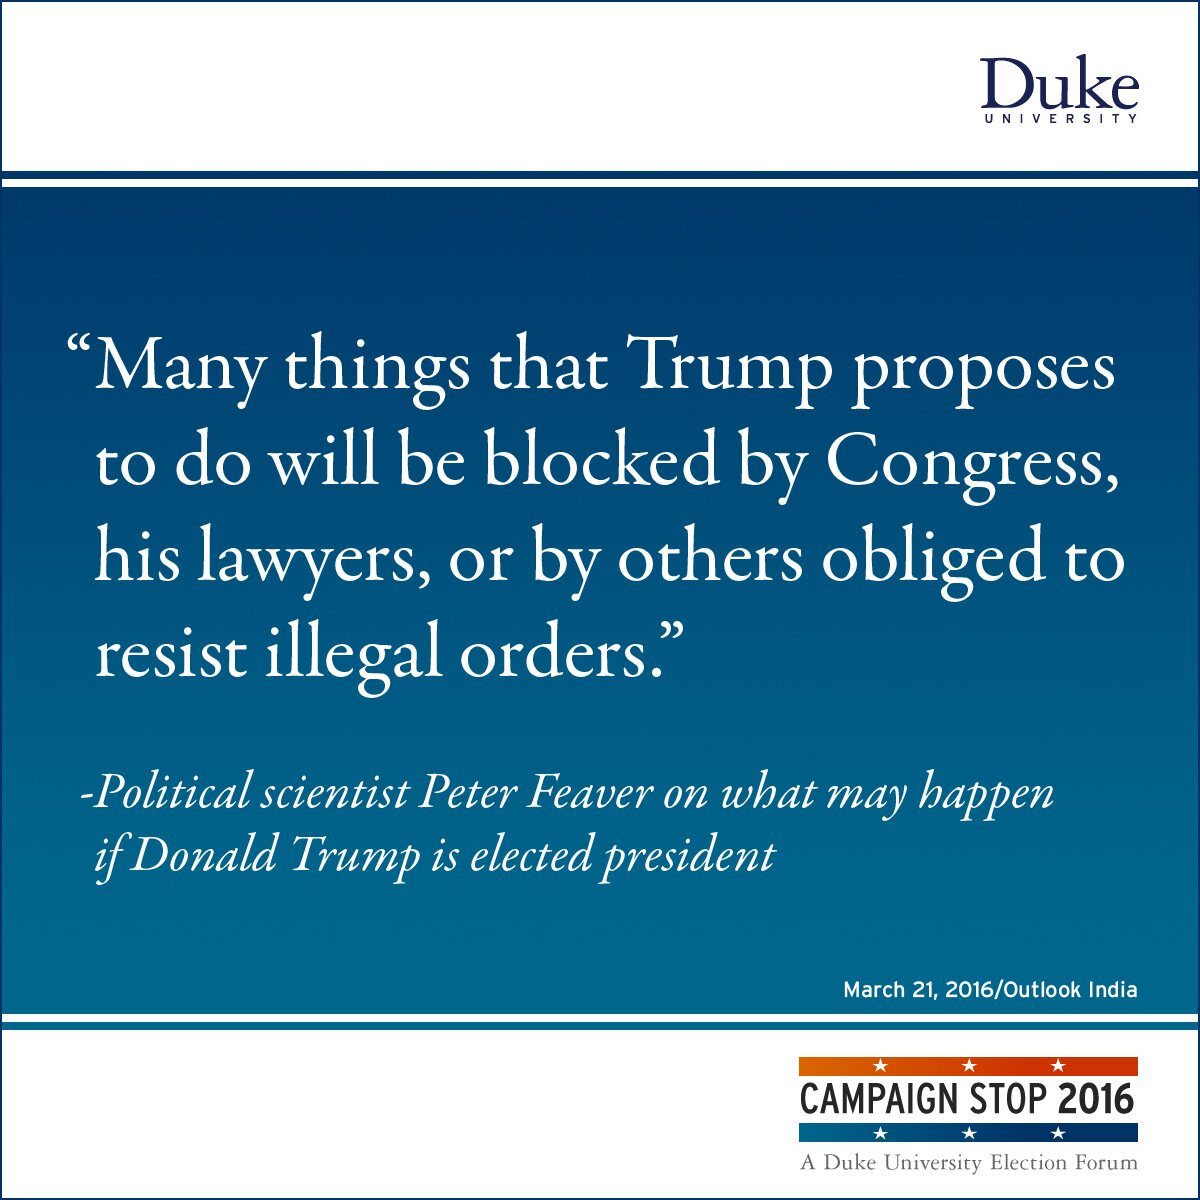 “Many things that Trump proposes to do will be blocked by Congress, his lawyers, or by others obliged to resist illegal orders.” -Political scientist Peter Feaver on what may happen if Donald Trump is elected president